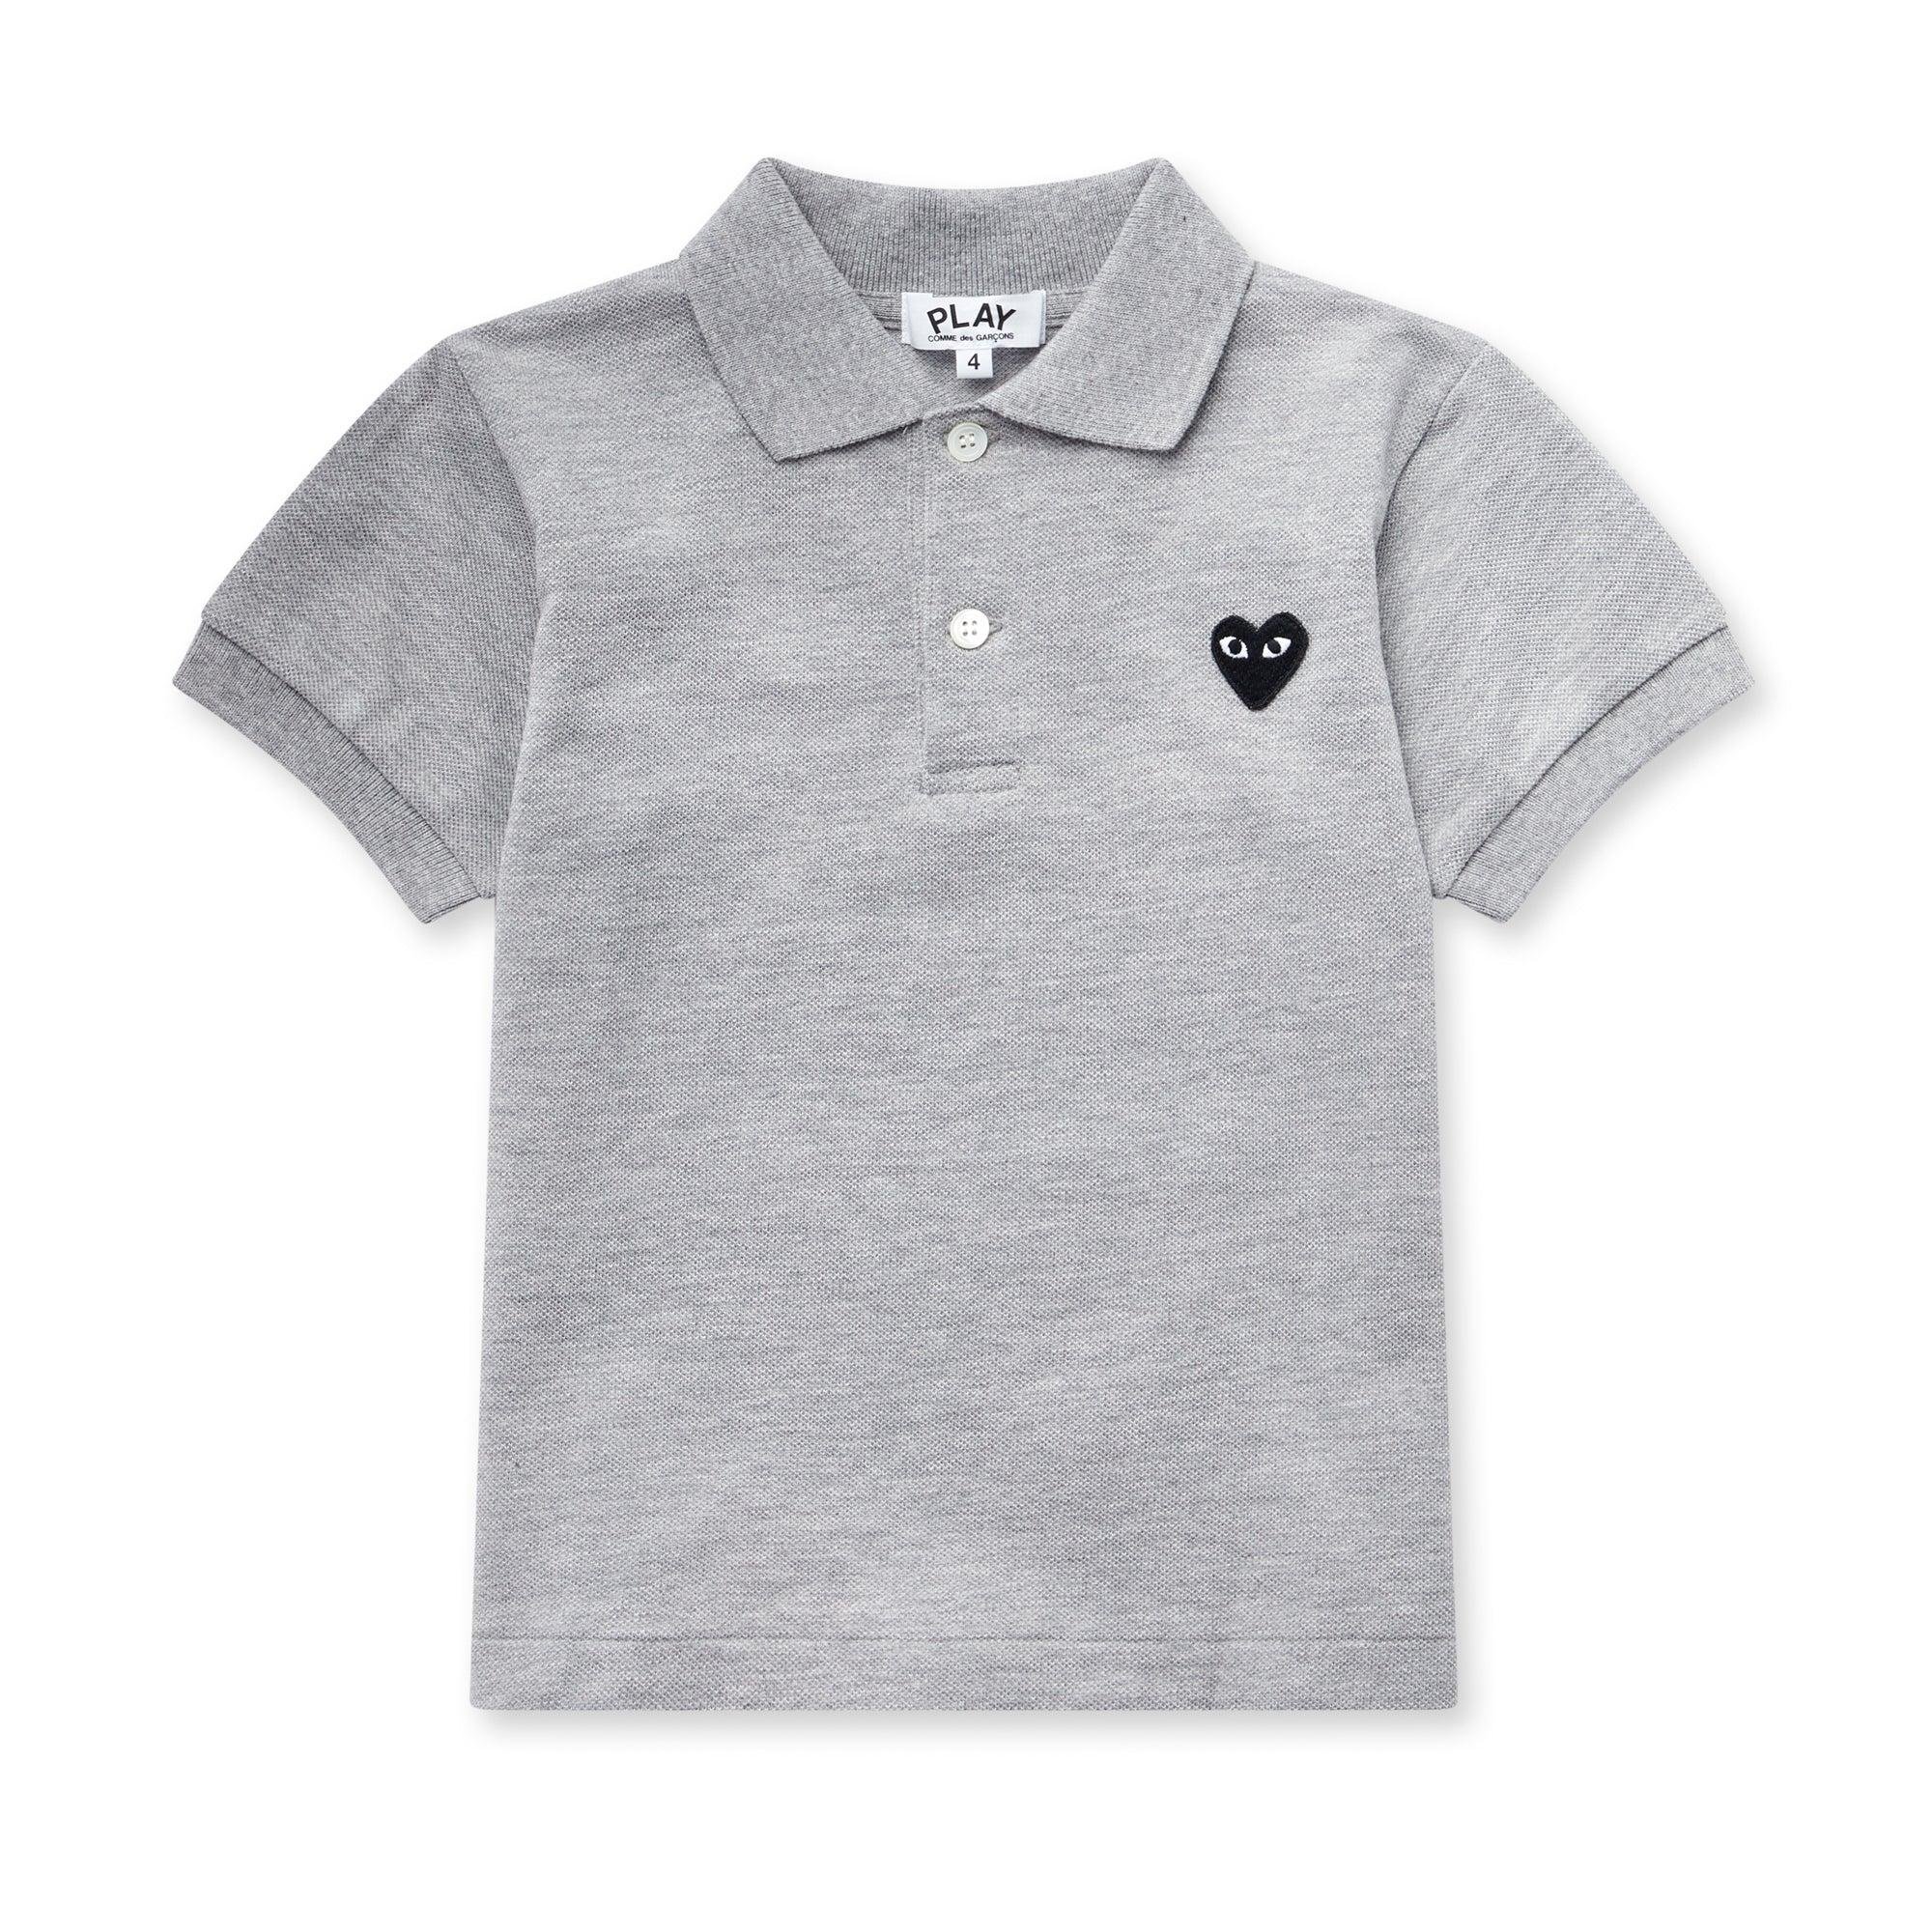 Play - Black Kid’s Polo Shirt - (Grey) by COMME DES GARCONS